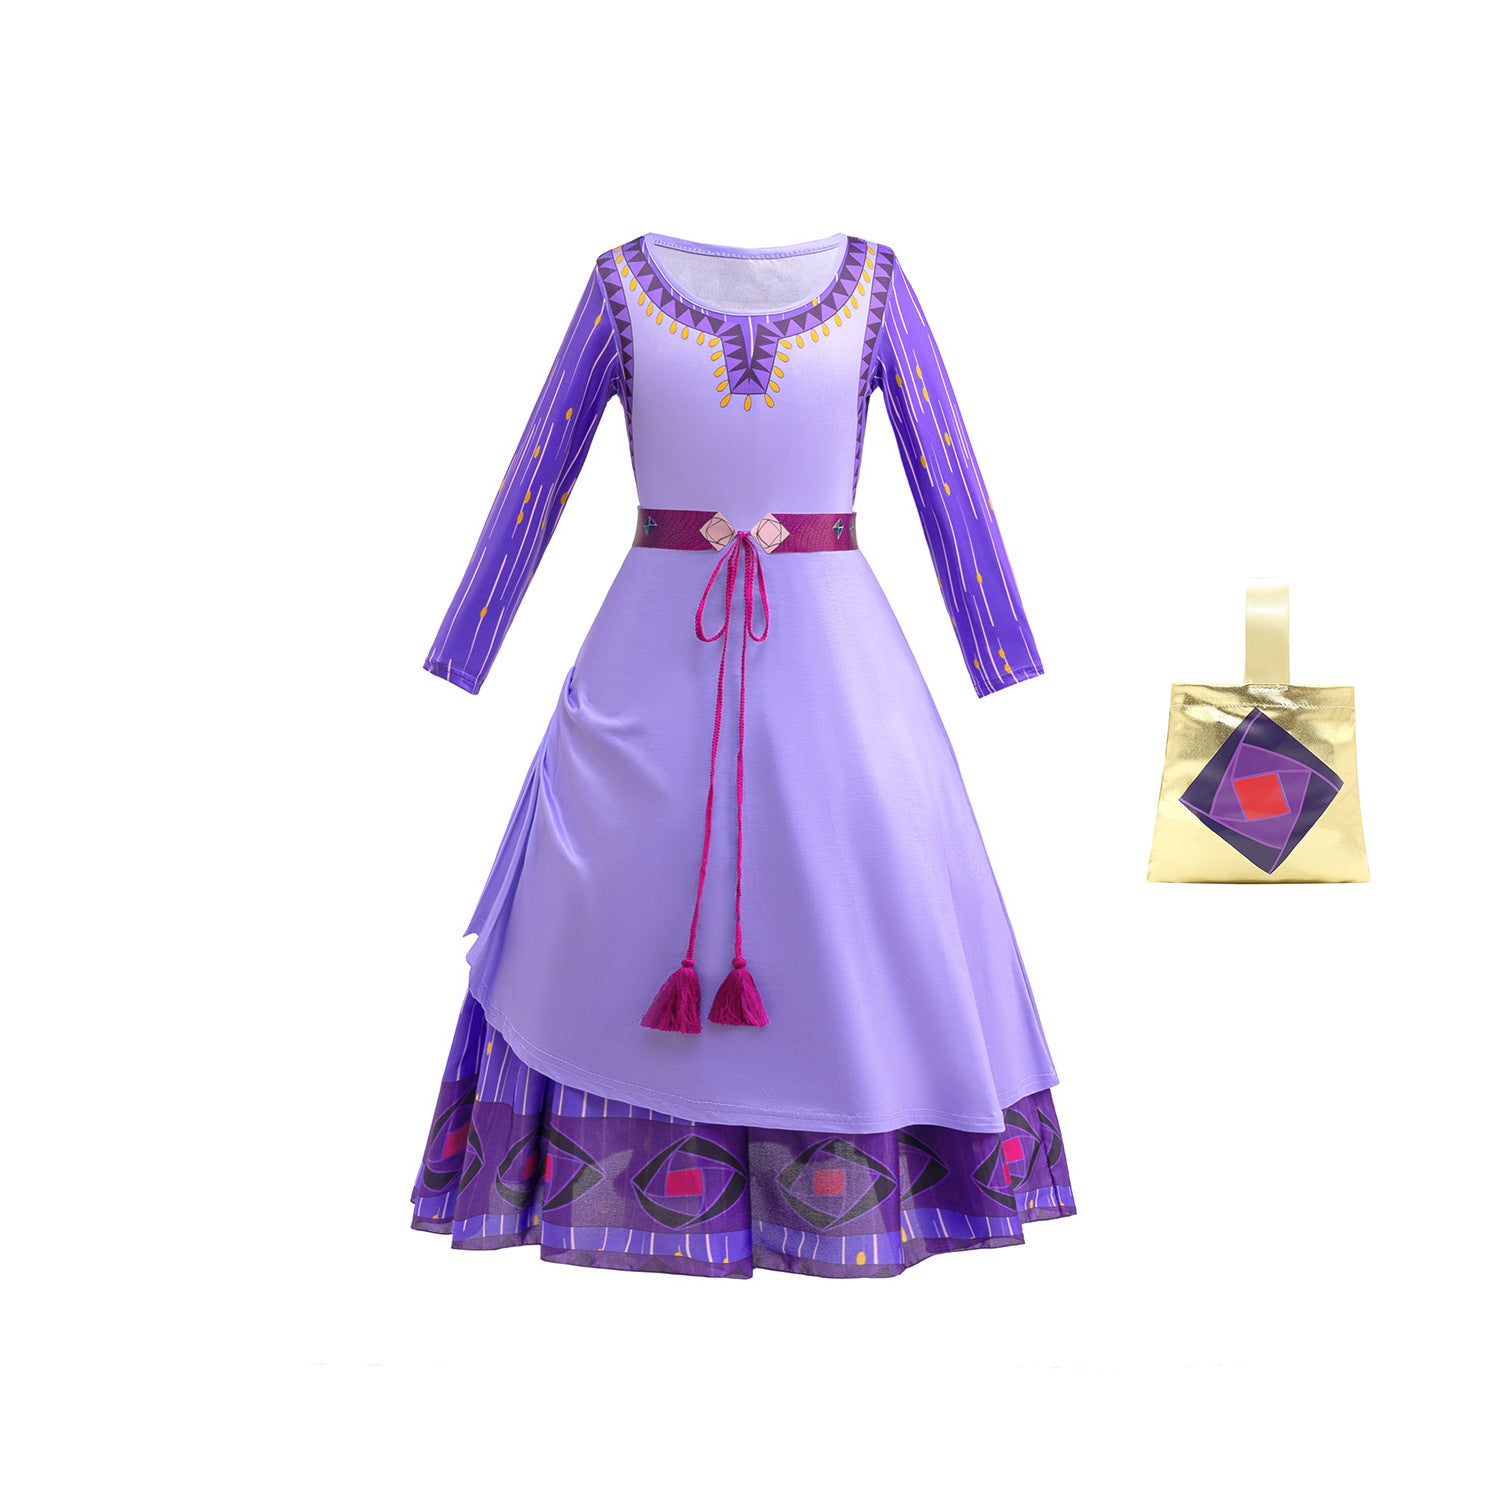 Girl Wish Asha Cosplay Costume Dress With Bag Outfits For Kids Holiday  Party - Purple / 3